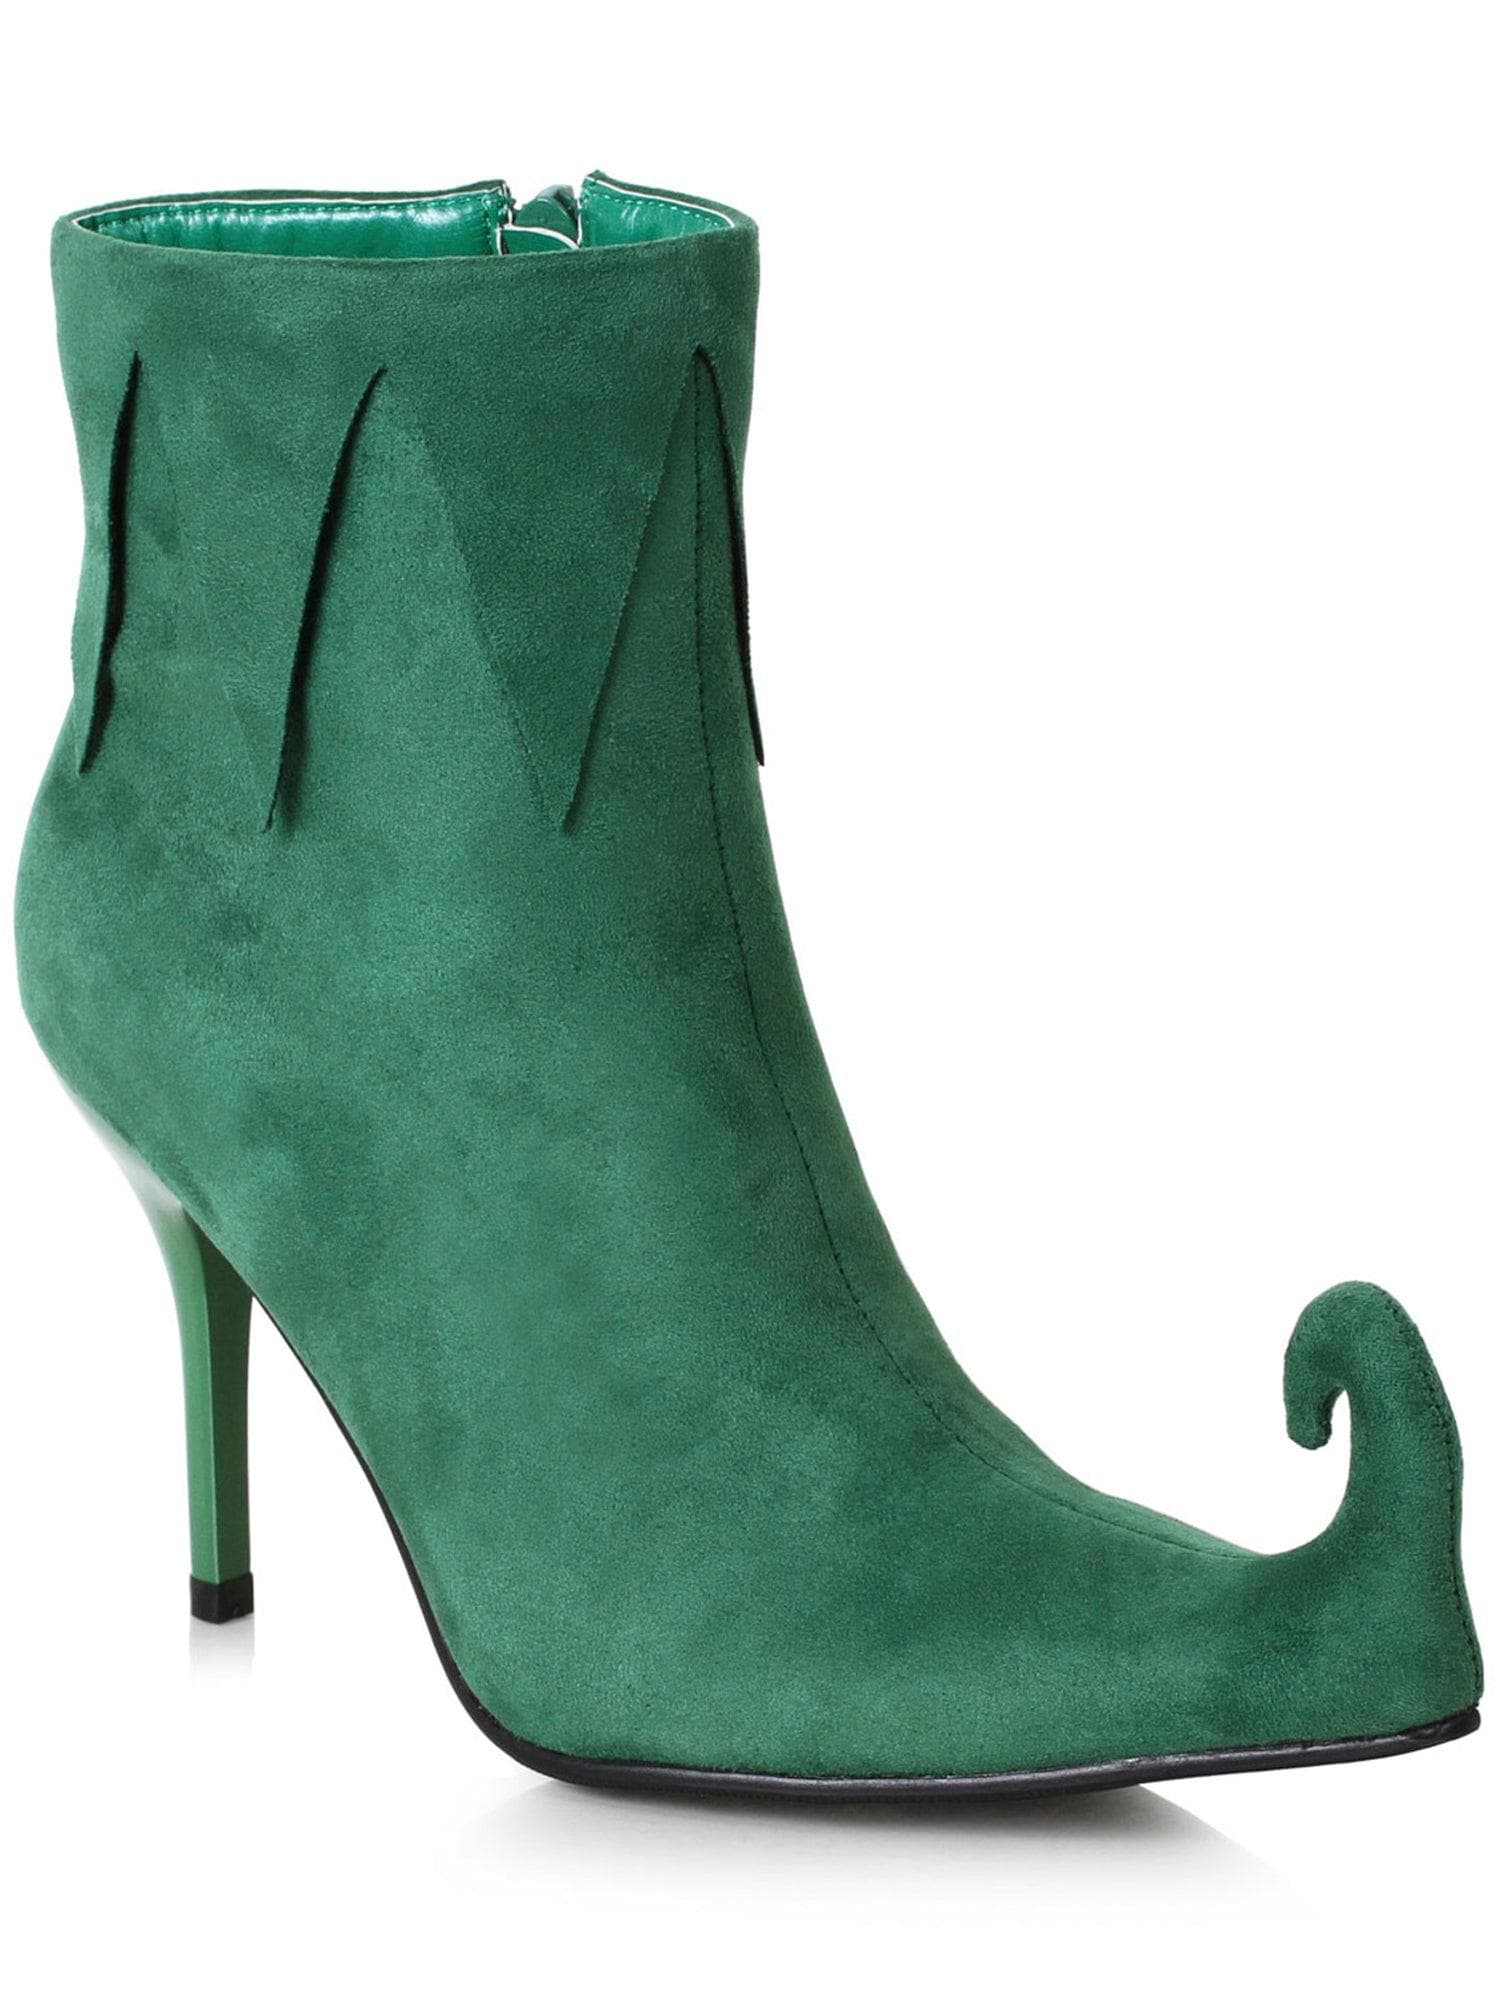 Adult Green Holiday Heeled Ankle Boots - costumes.com